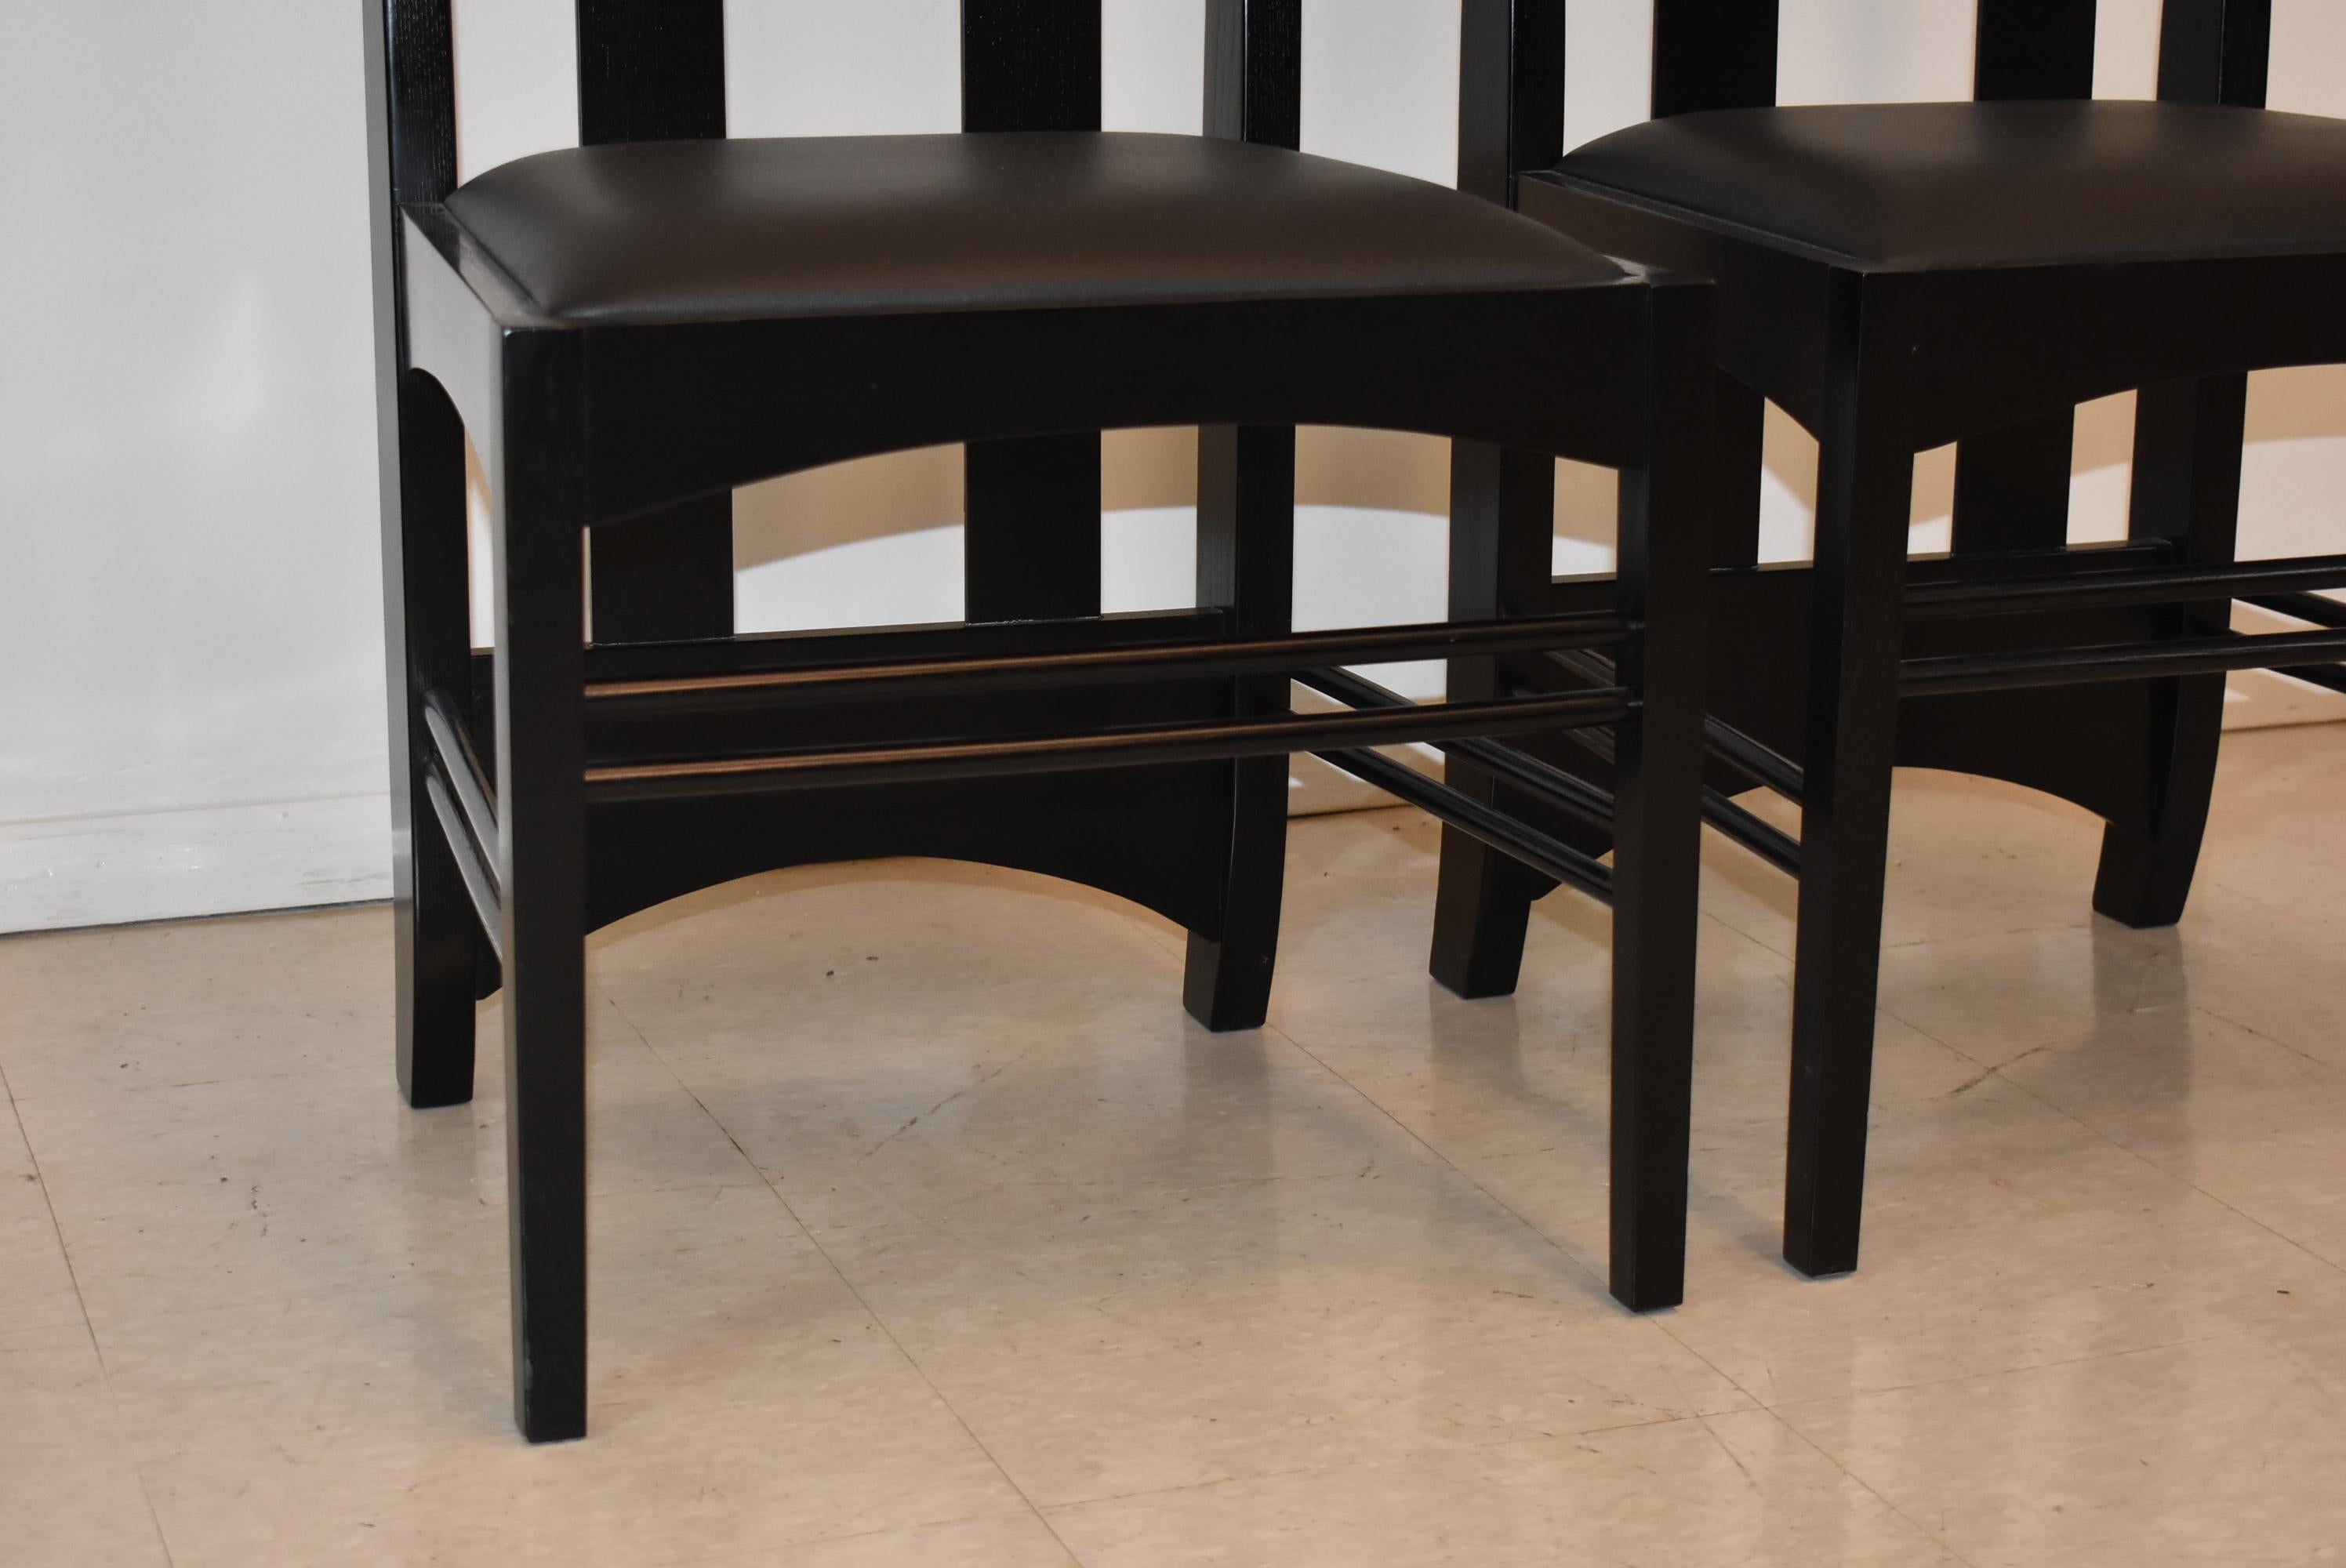 Pair of ash black lacquer finish Arts & Crafts chairs by Charles Macintosh for Cassina. Cutout back details.